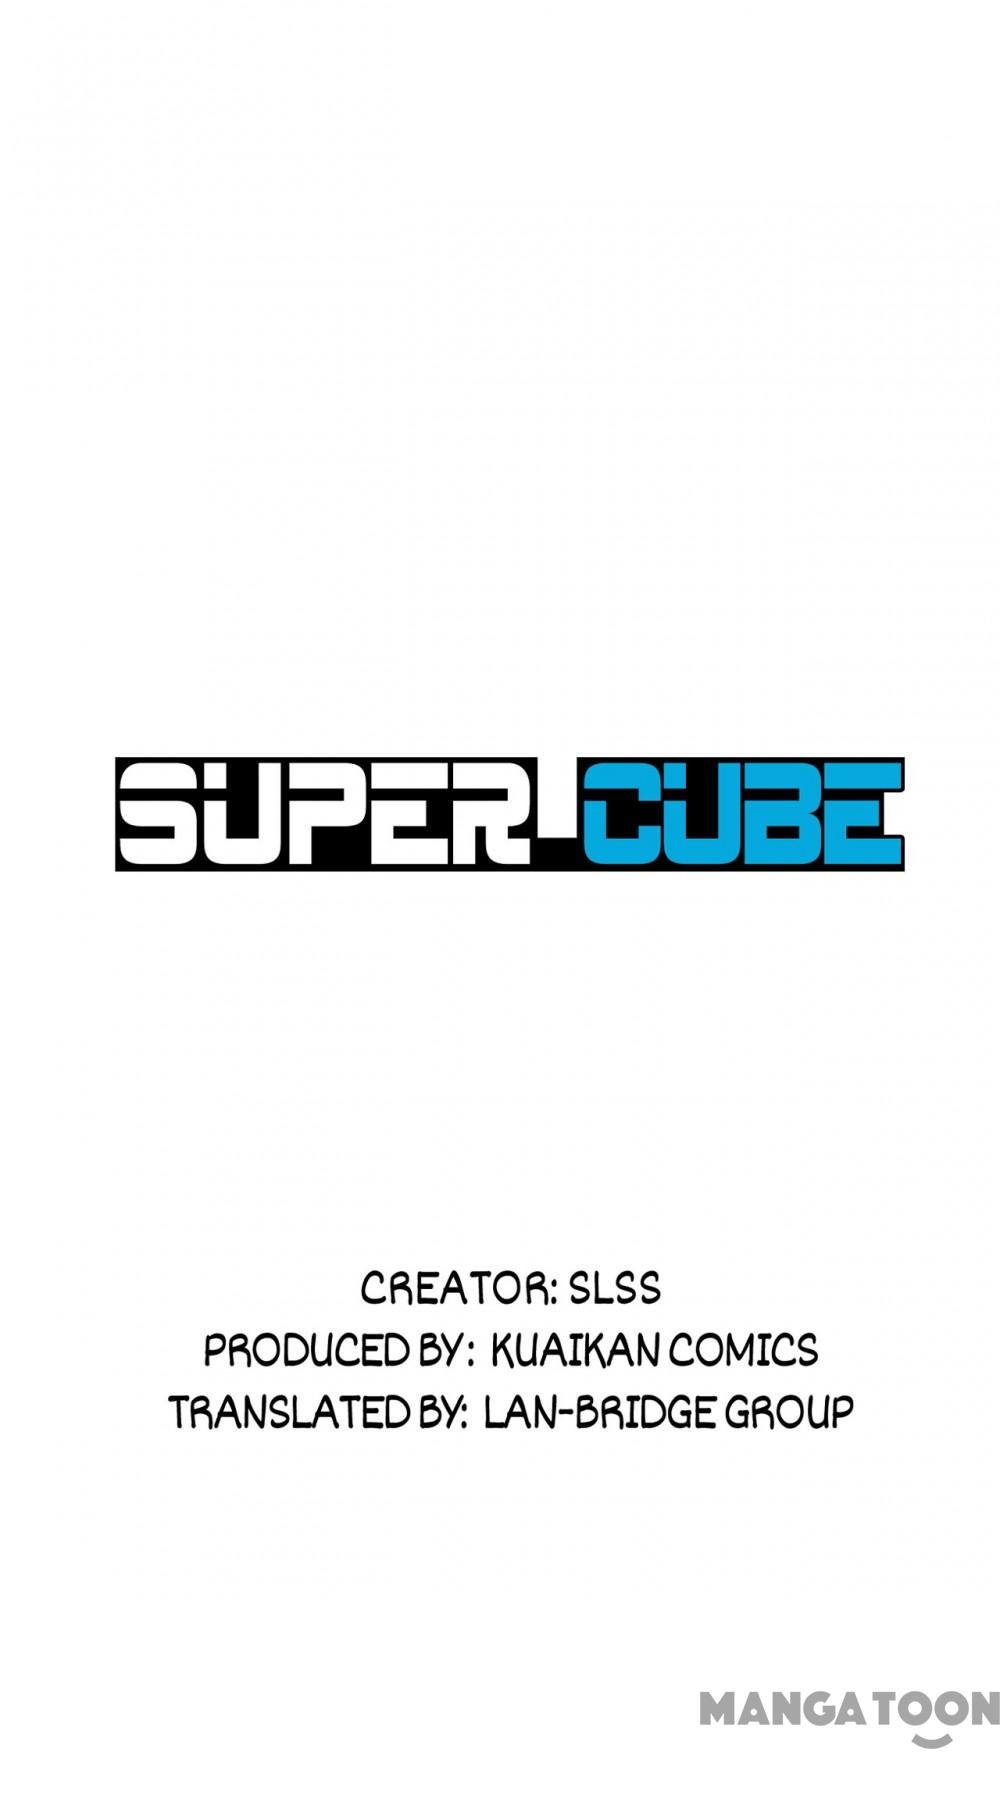 Super Cube Chapter 32